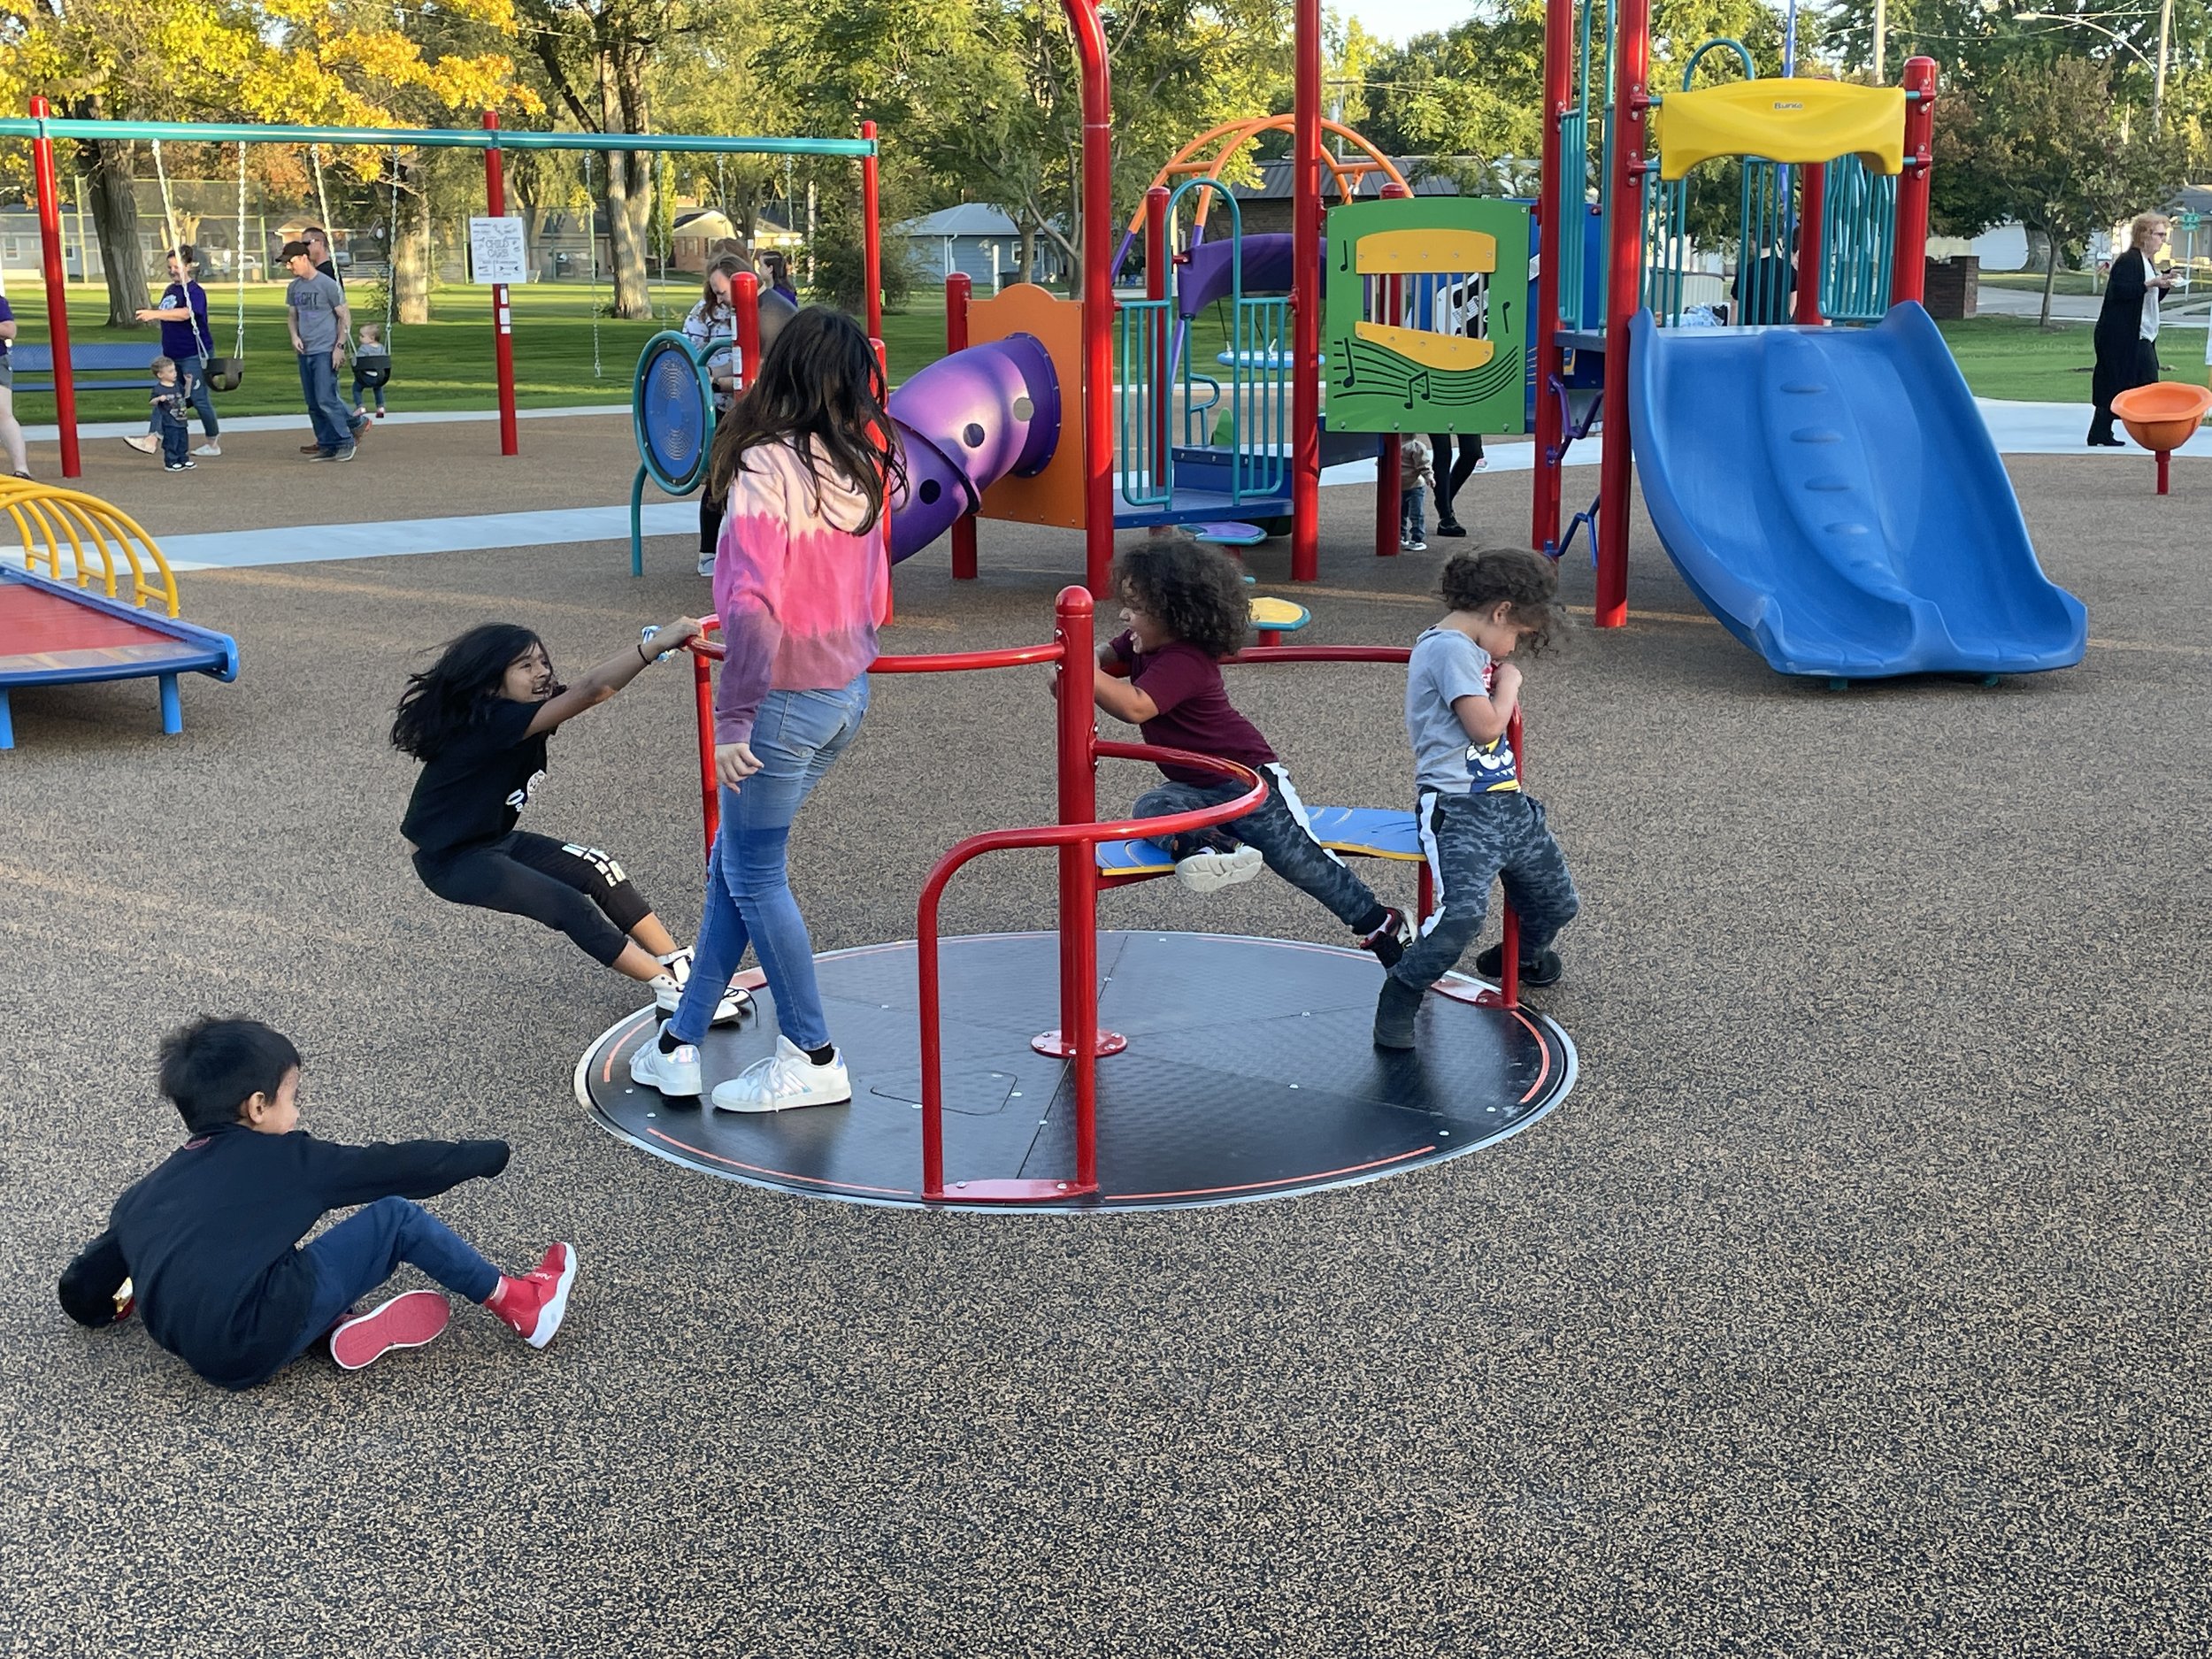   INCLUSIVE PARK - The Key Society contributed $100,000 to expand the playground equipment at Crosier Park.  